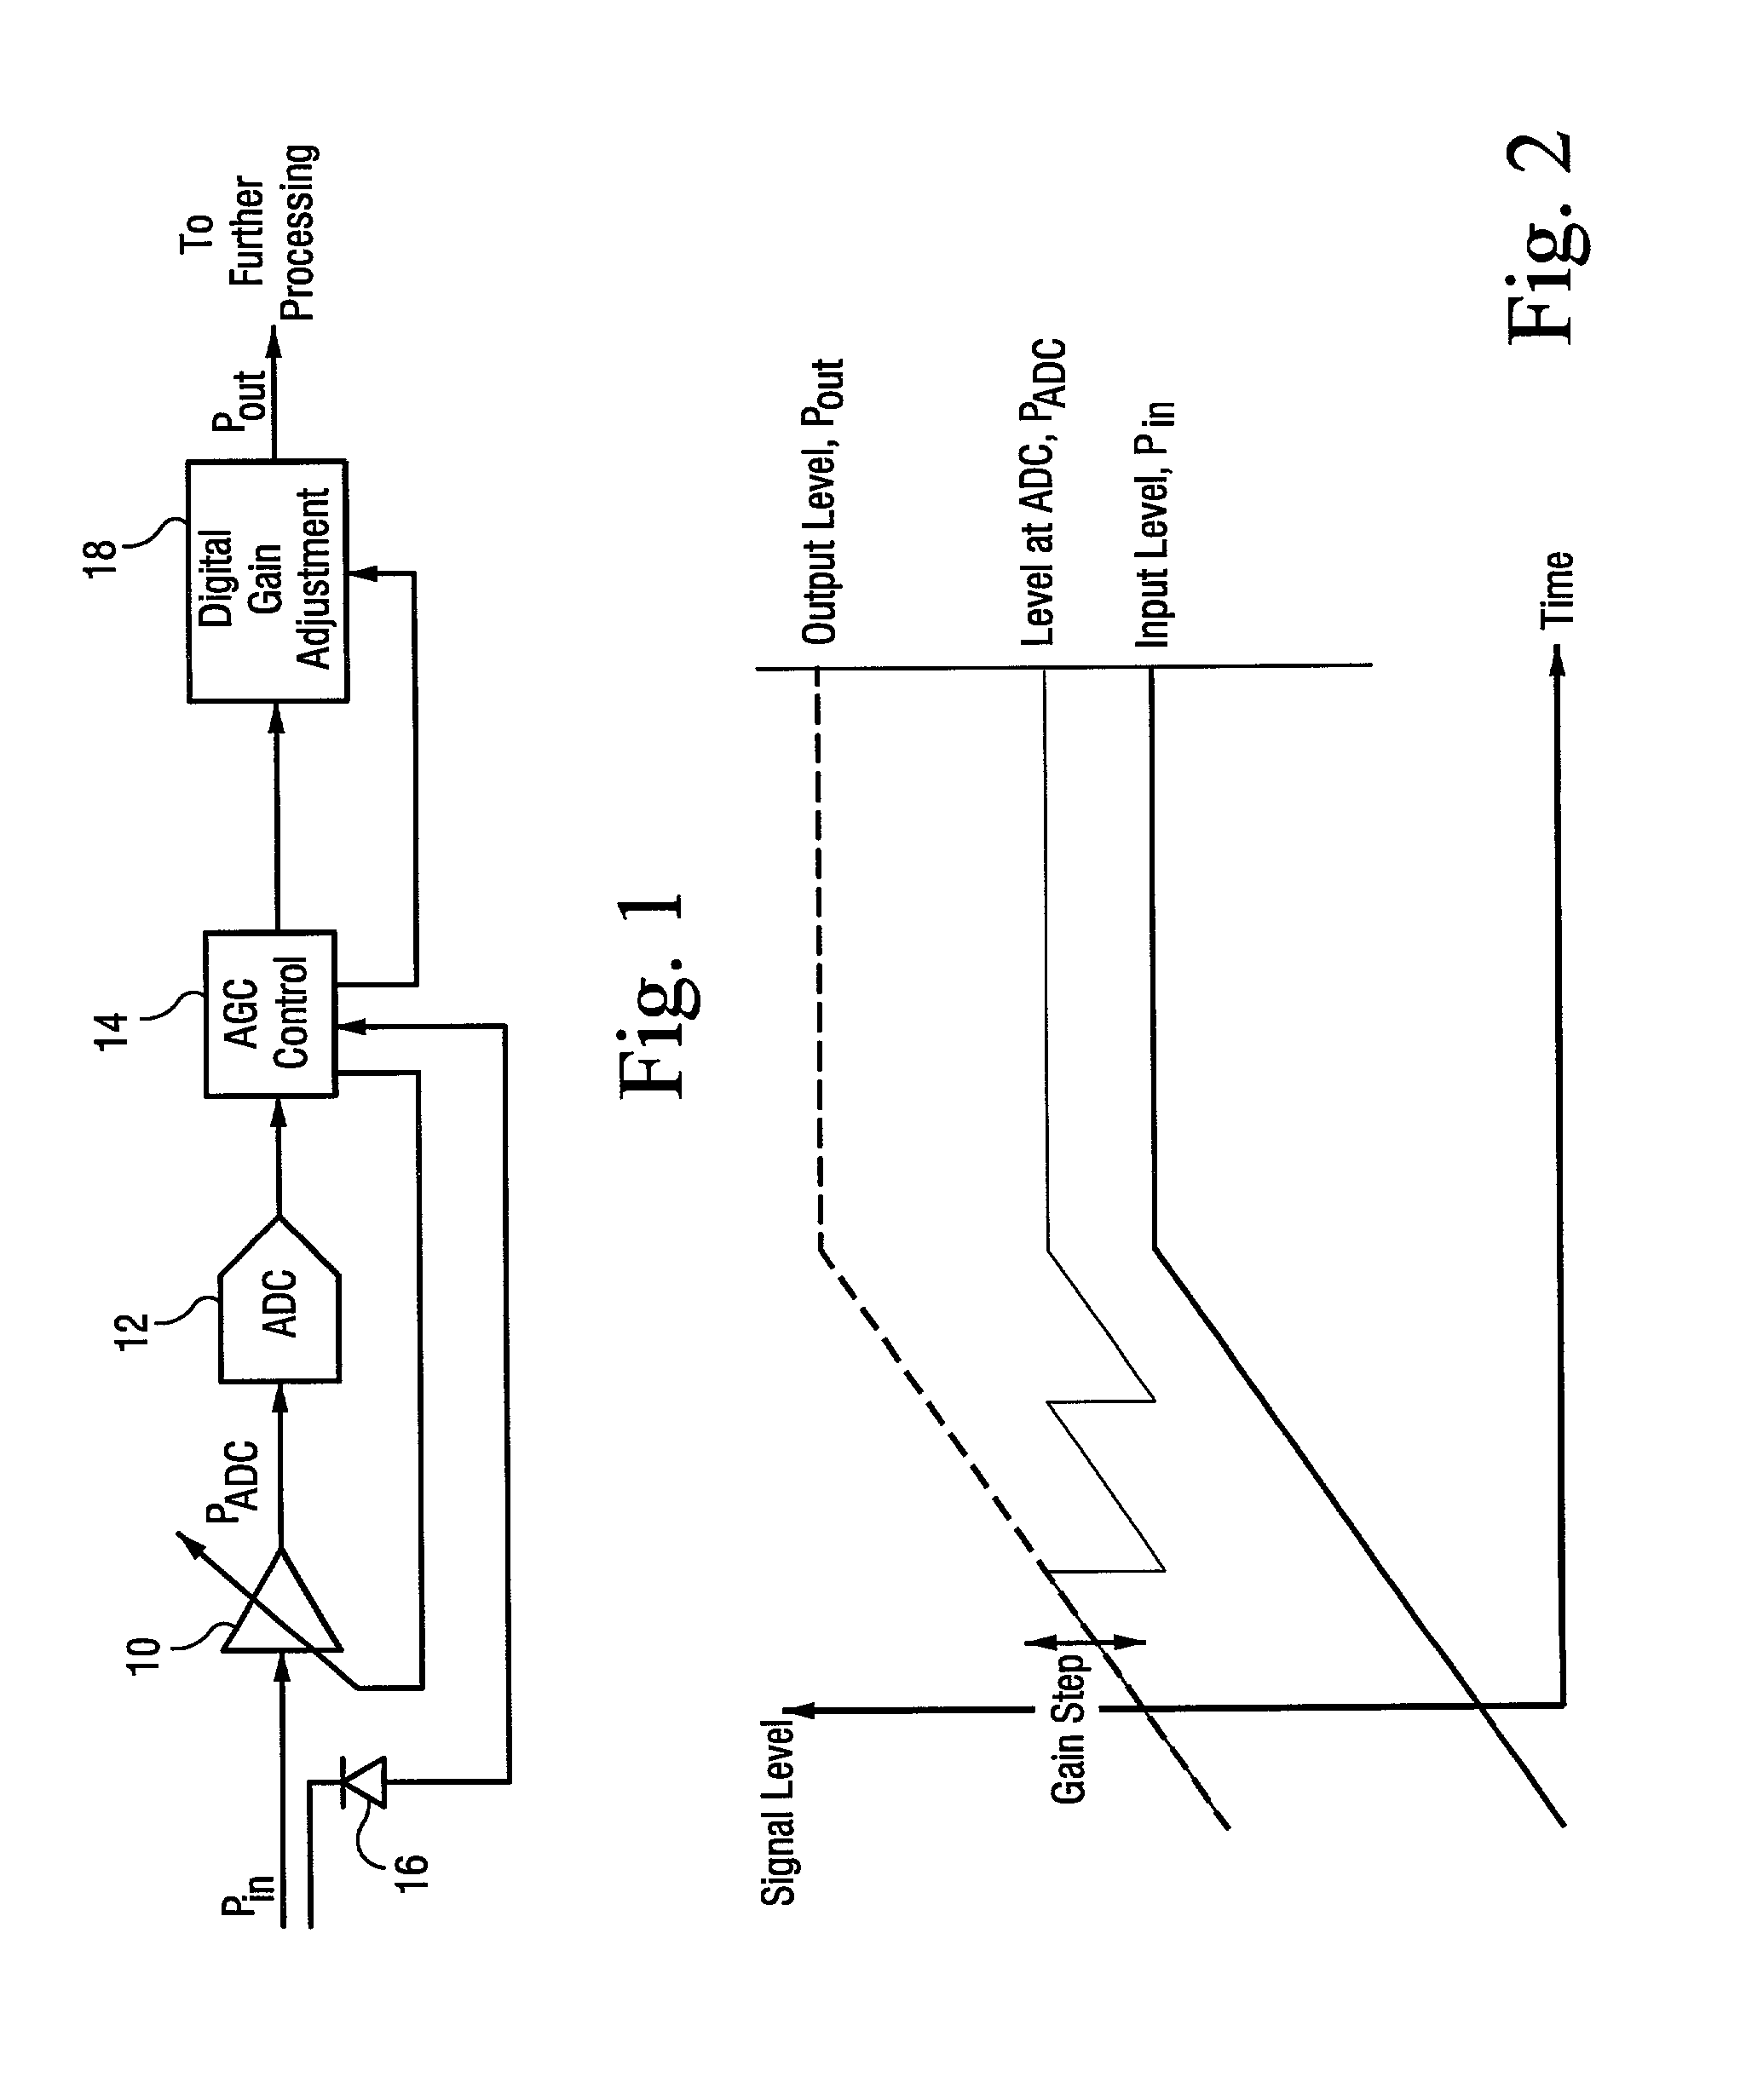 Method and apparatus for reducing the effect of AGC switching transients